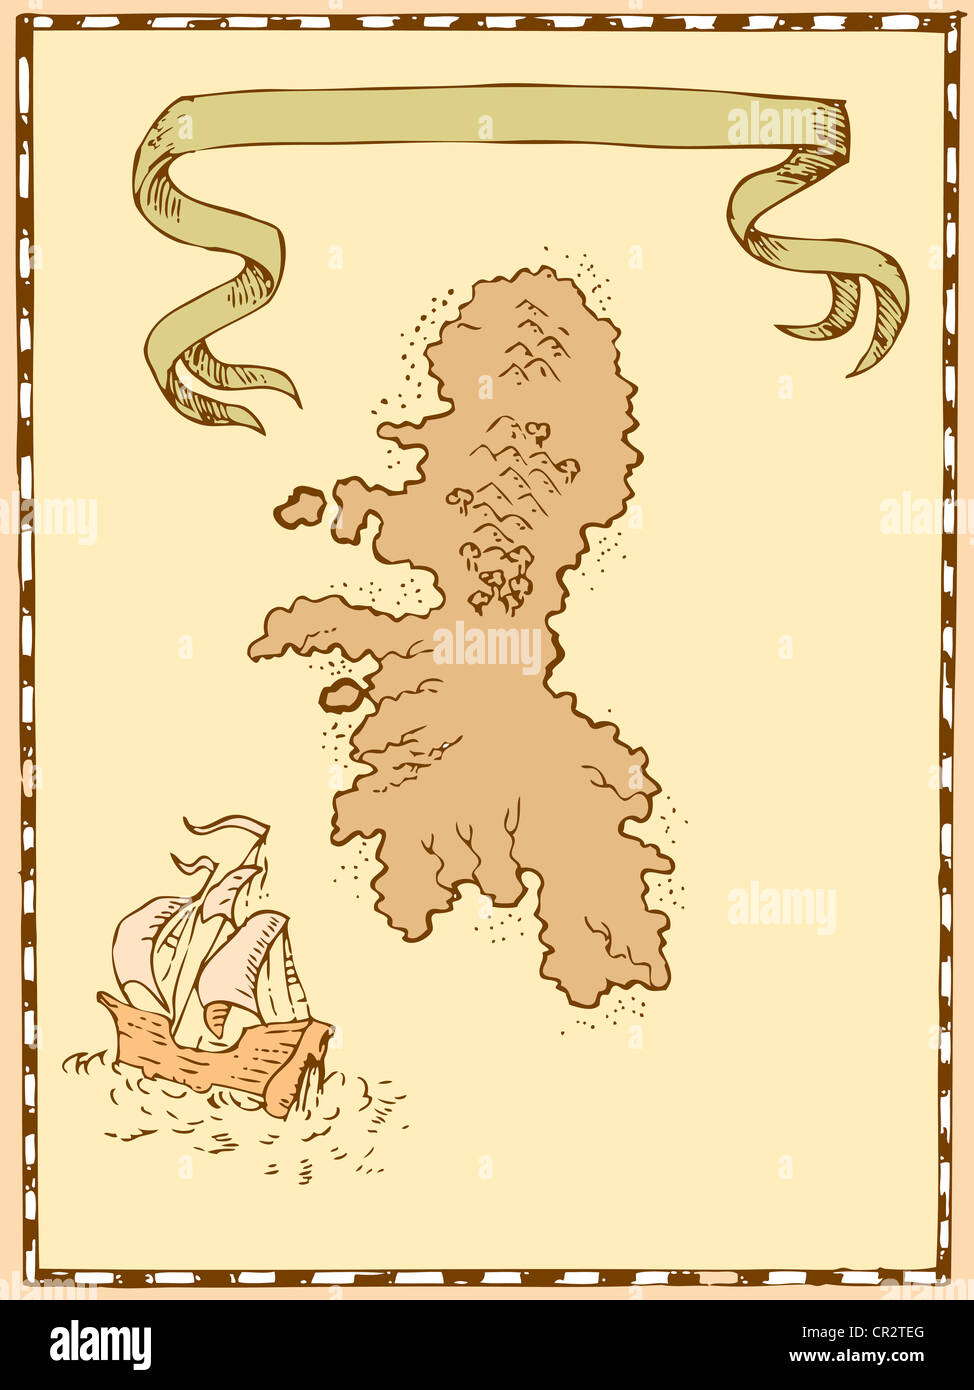 Illustration of a treasure map showing island with sailing ship galleon and ribbon done in vintage style. Stock Photo